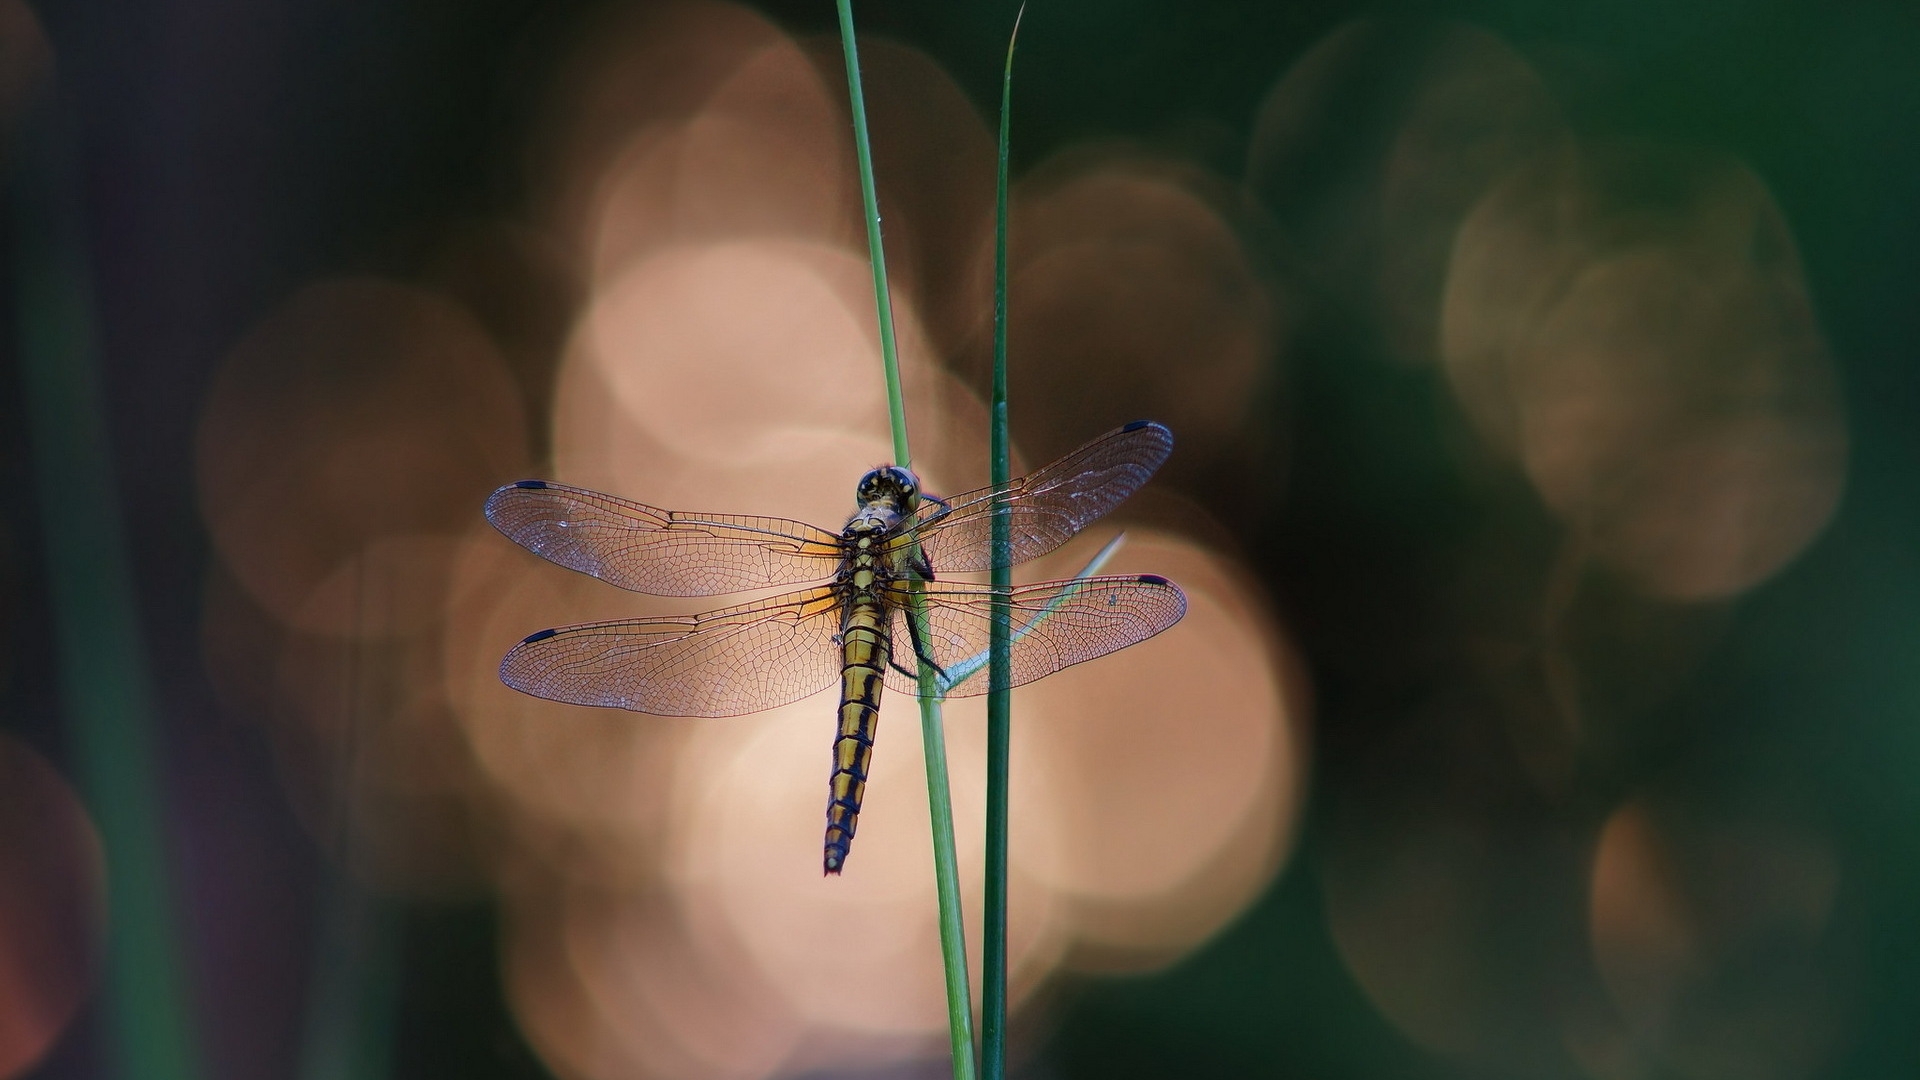 Blue Dragonfly on a Blade of Grass for 1920 x 1080 HDTV 1080p resolution